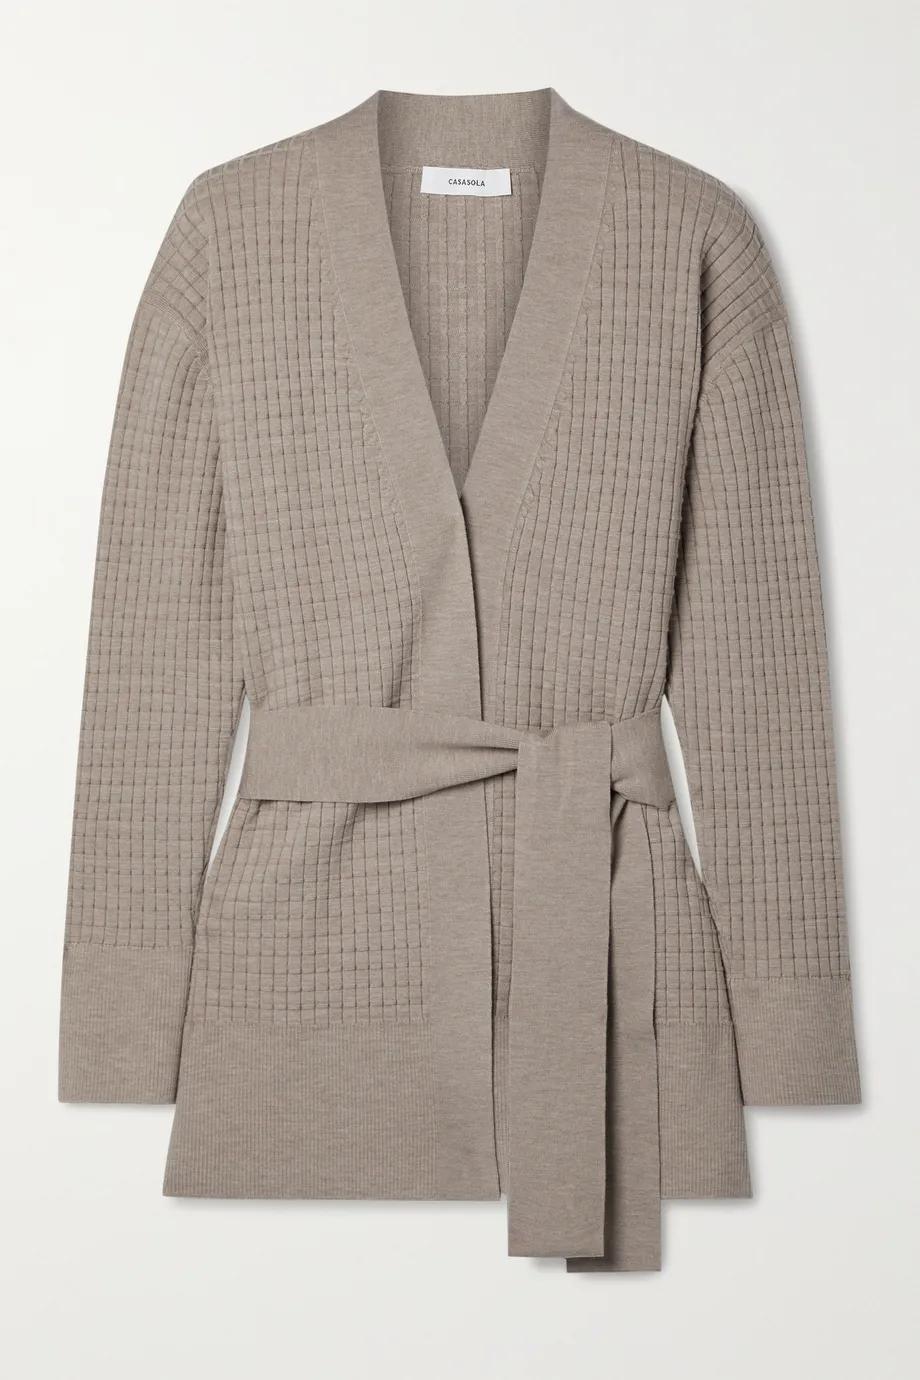 Como belted waffe-knit wool-blend cardigan by CASASOLA